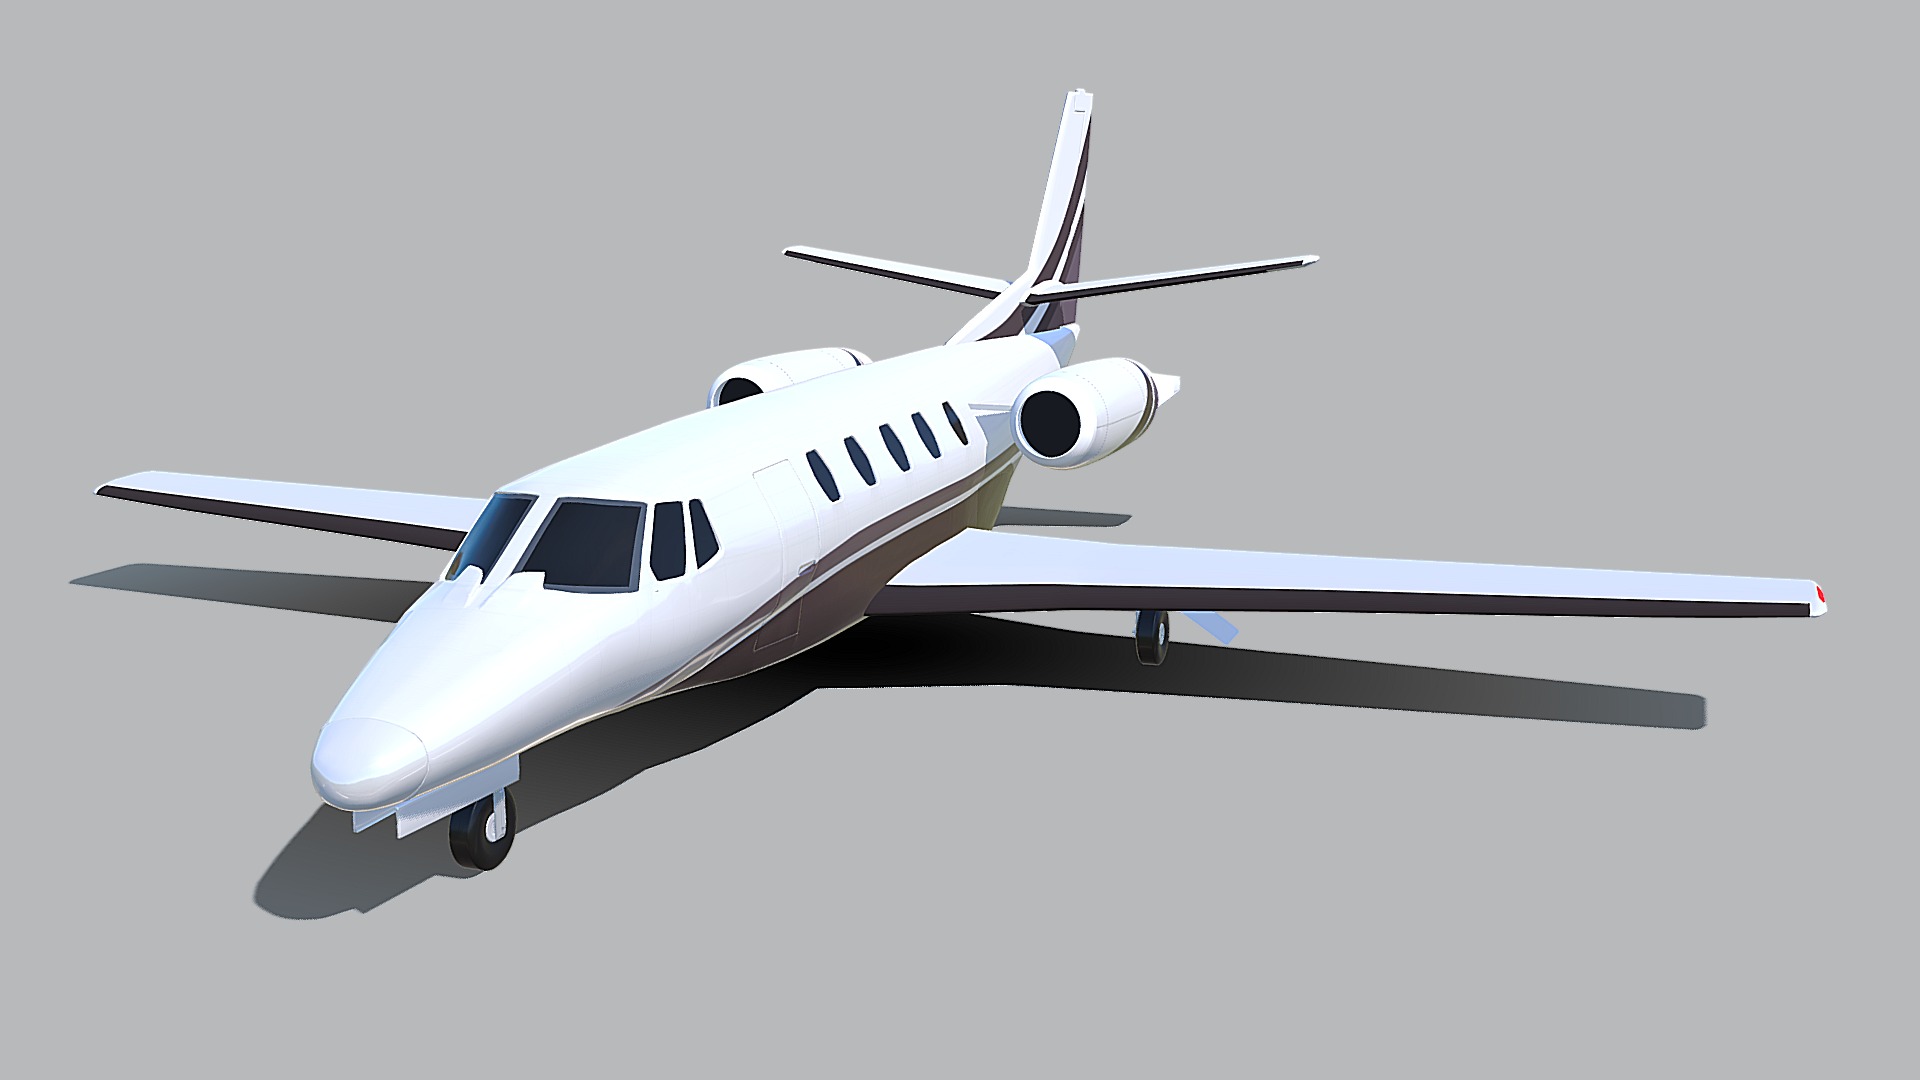 3D model Cessna Citation XLS luxury jet - This is a 3D model of the Cessna Citation XLS luxury jet. The 3D model is about a white airplane flying in the sky.